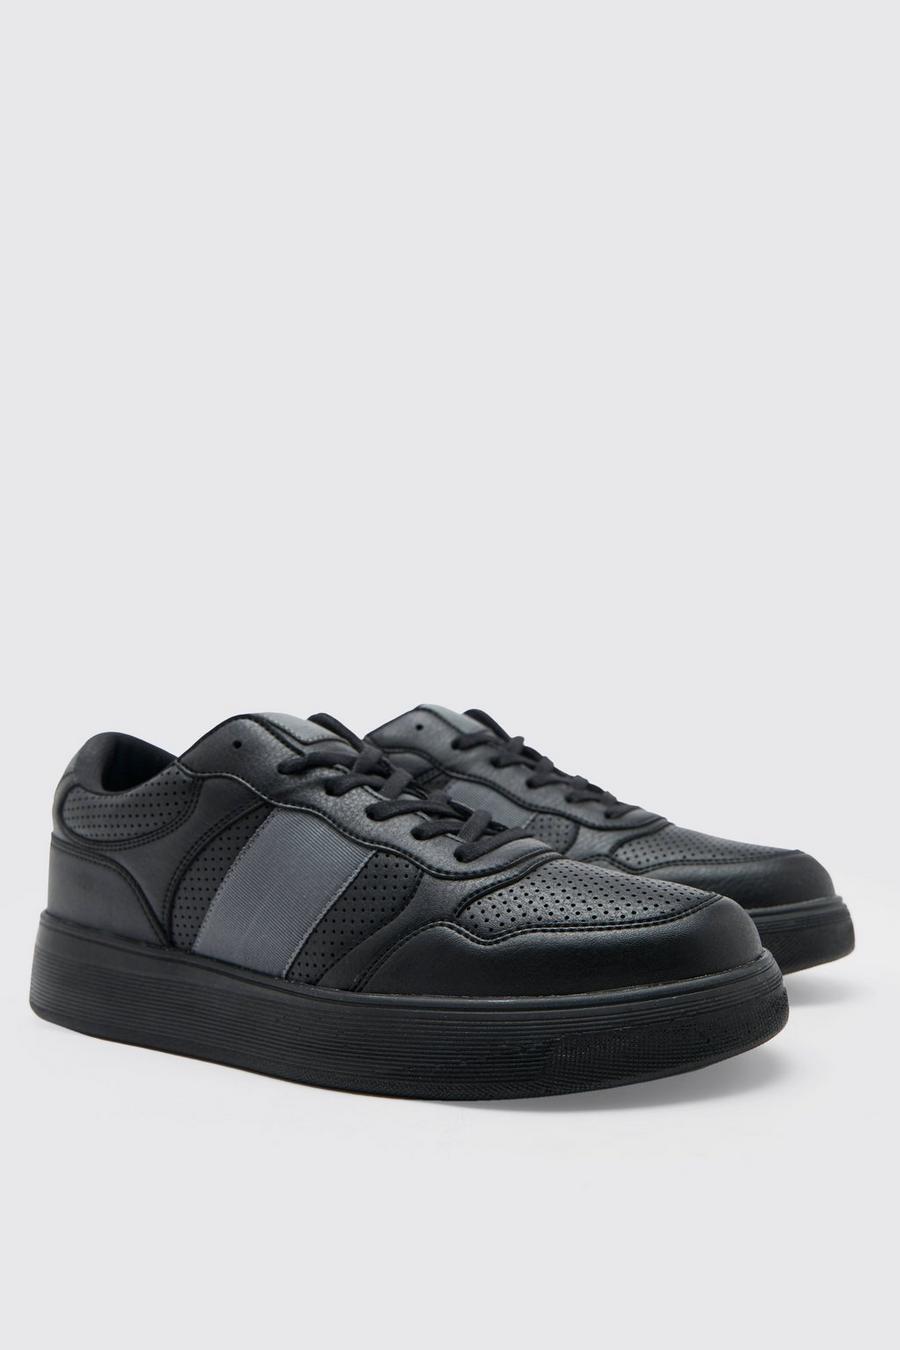 Black noir Perforated Contrast Tape Trainer